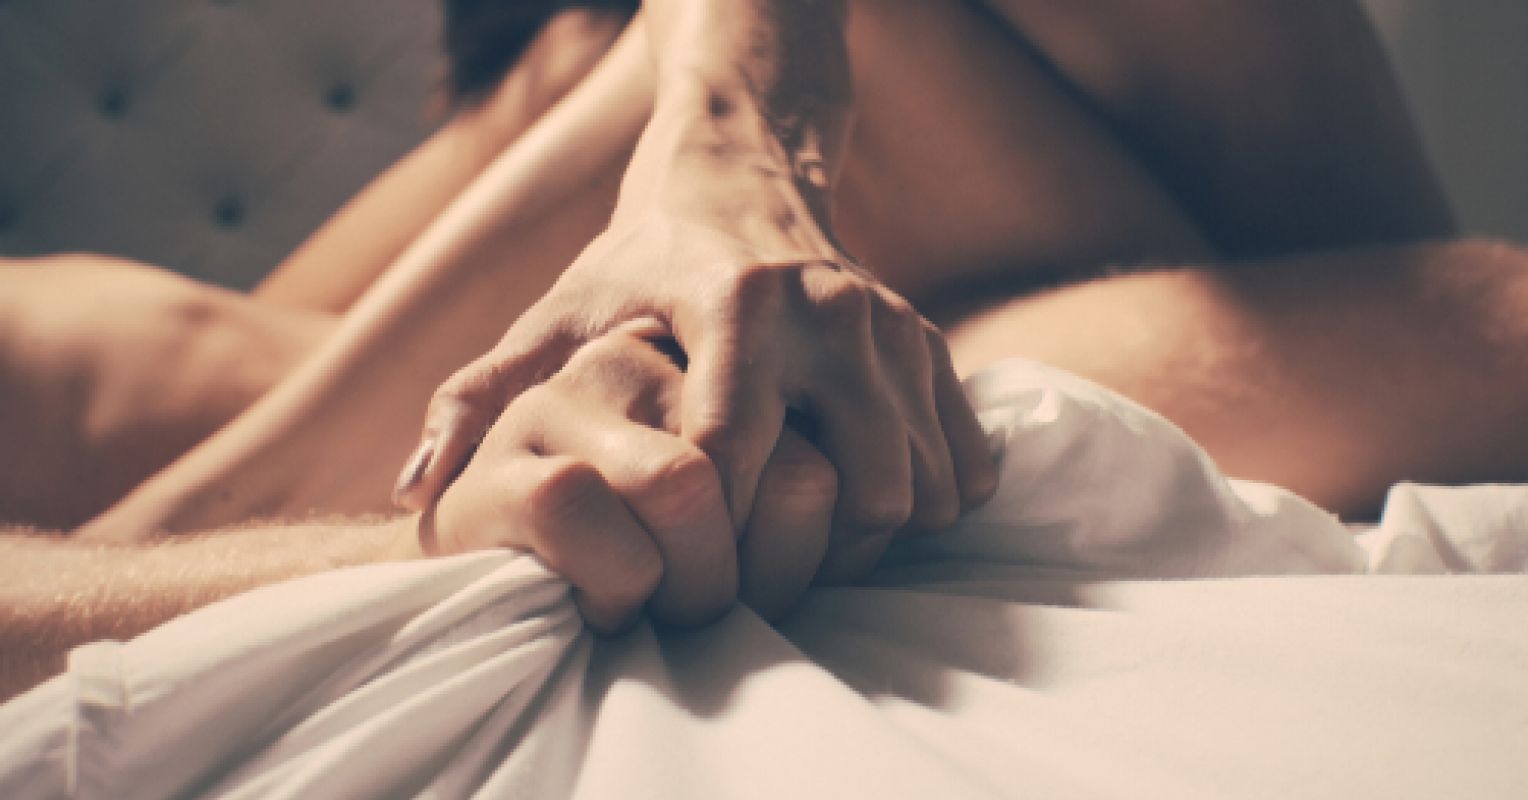 There May Be a Better Way to Initiate Sex with Your Partner Psychology Today